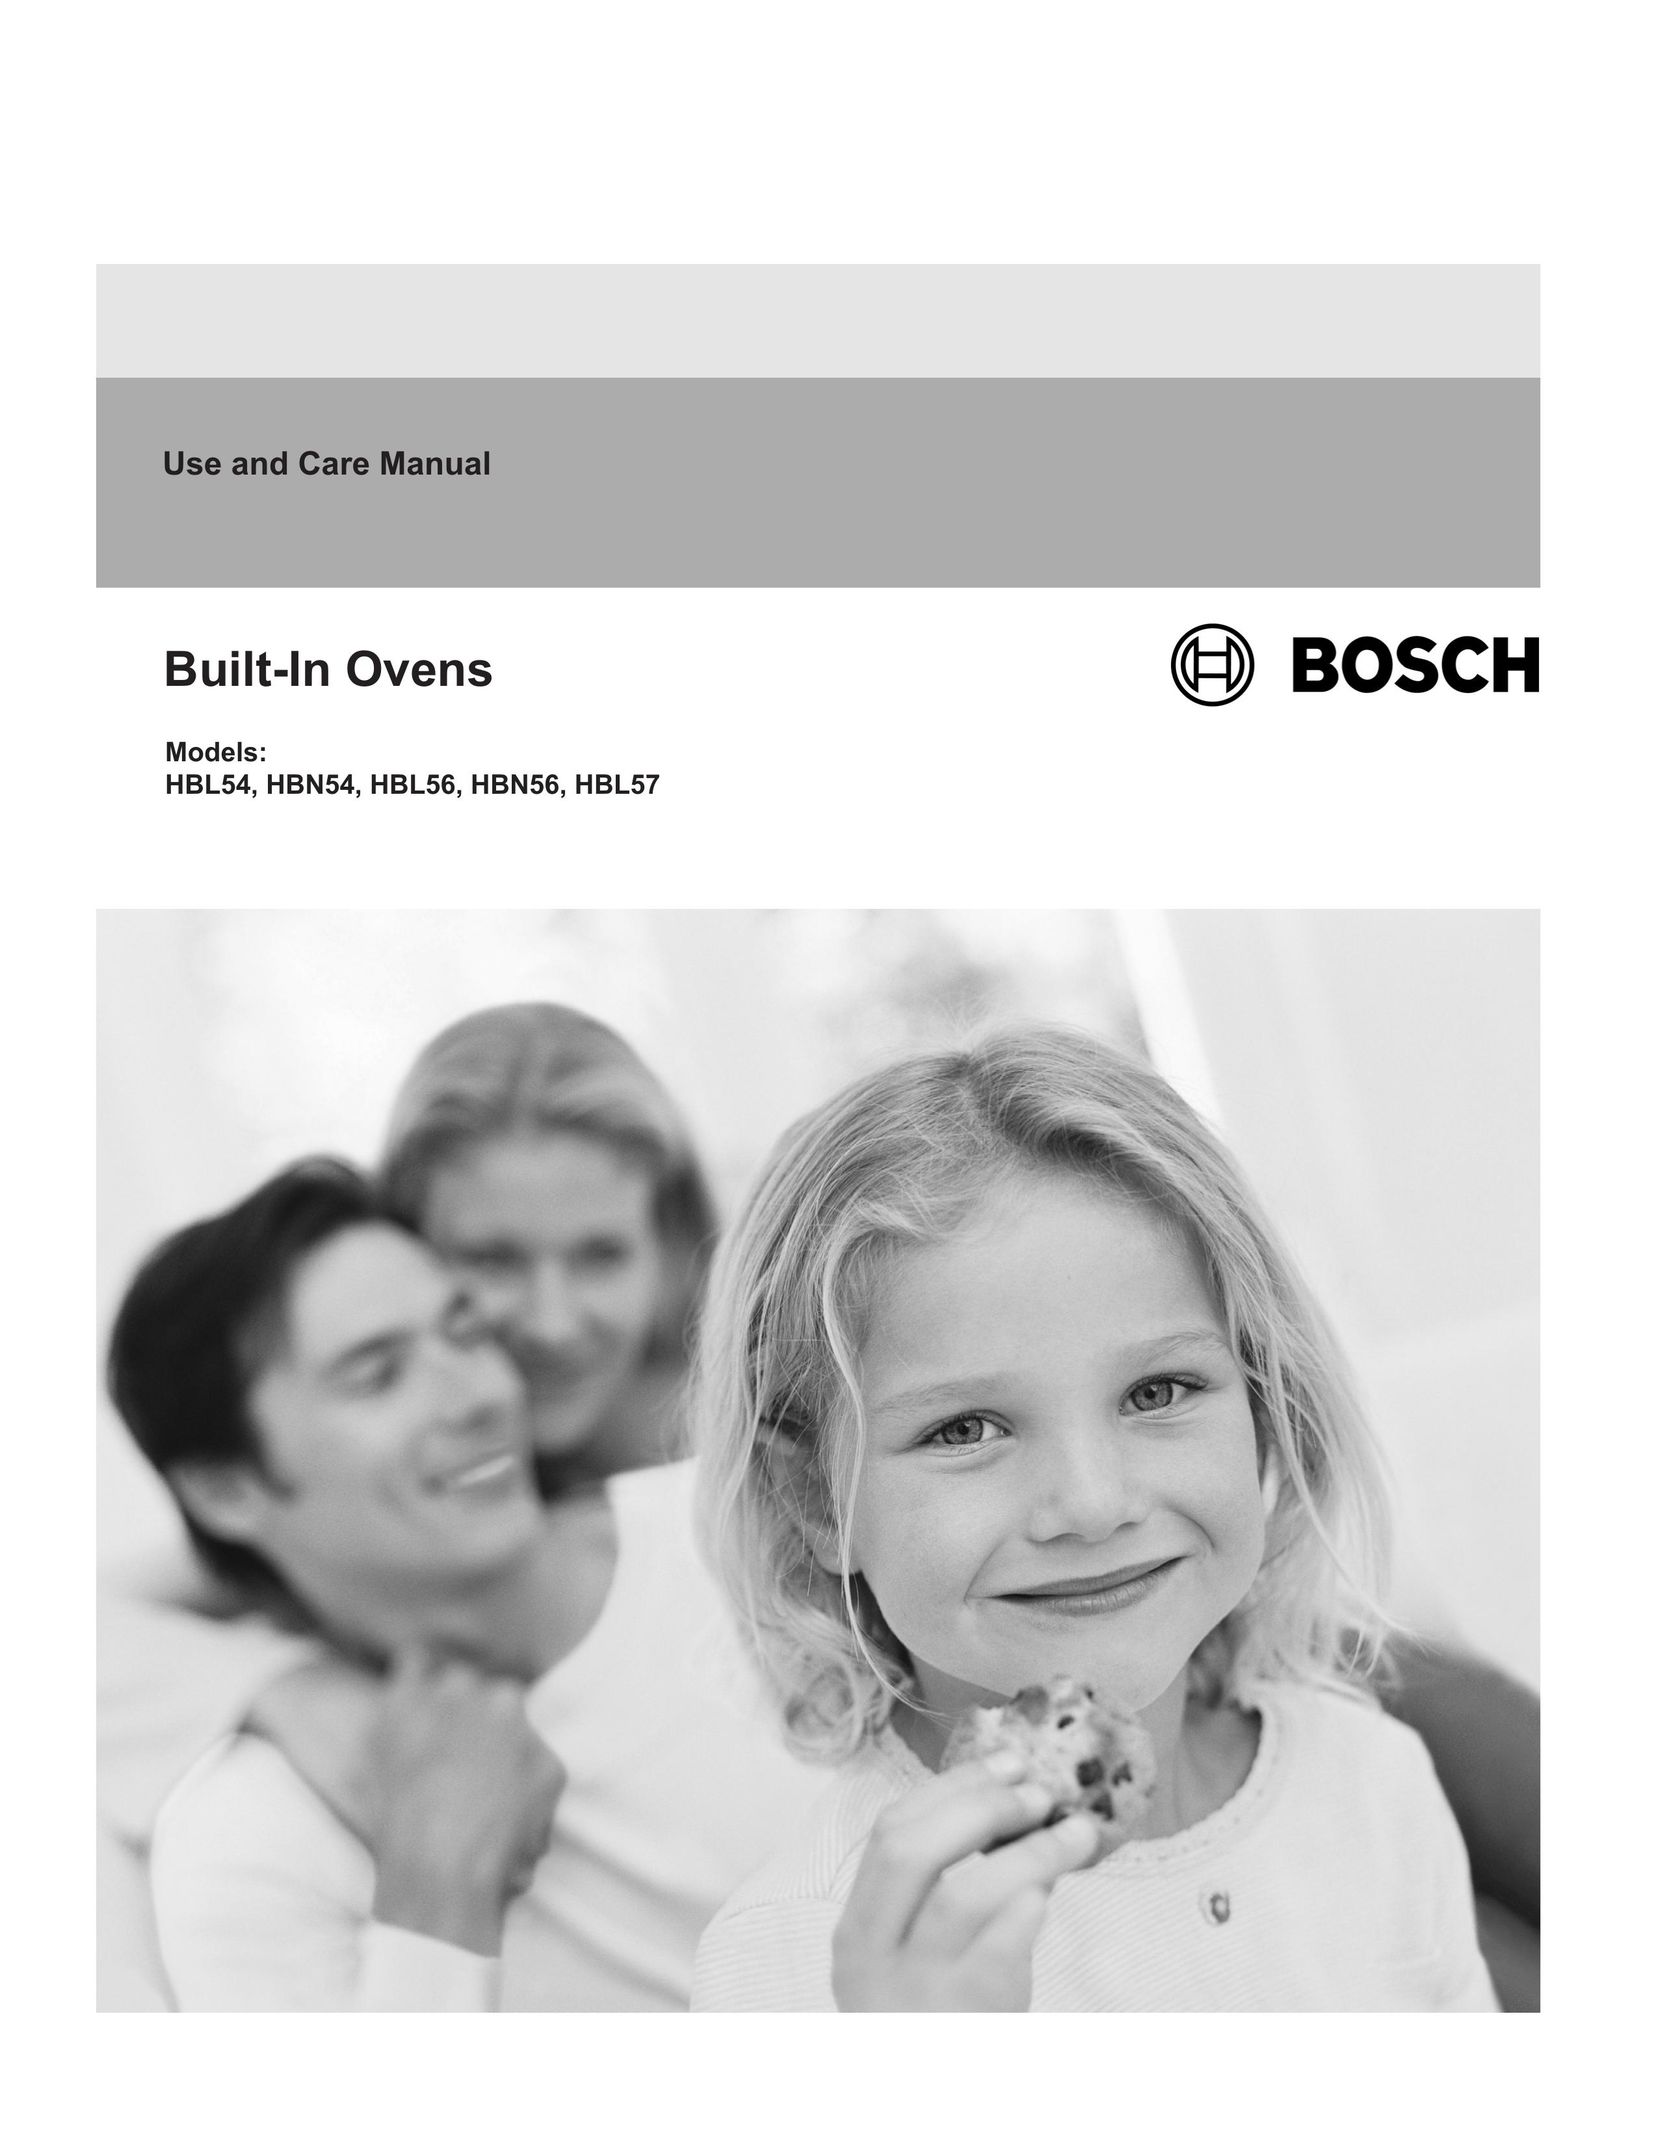 Bosch Appliances BL54 Microwave Oven User Manual